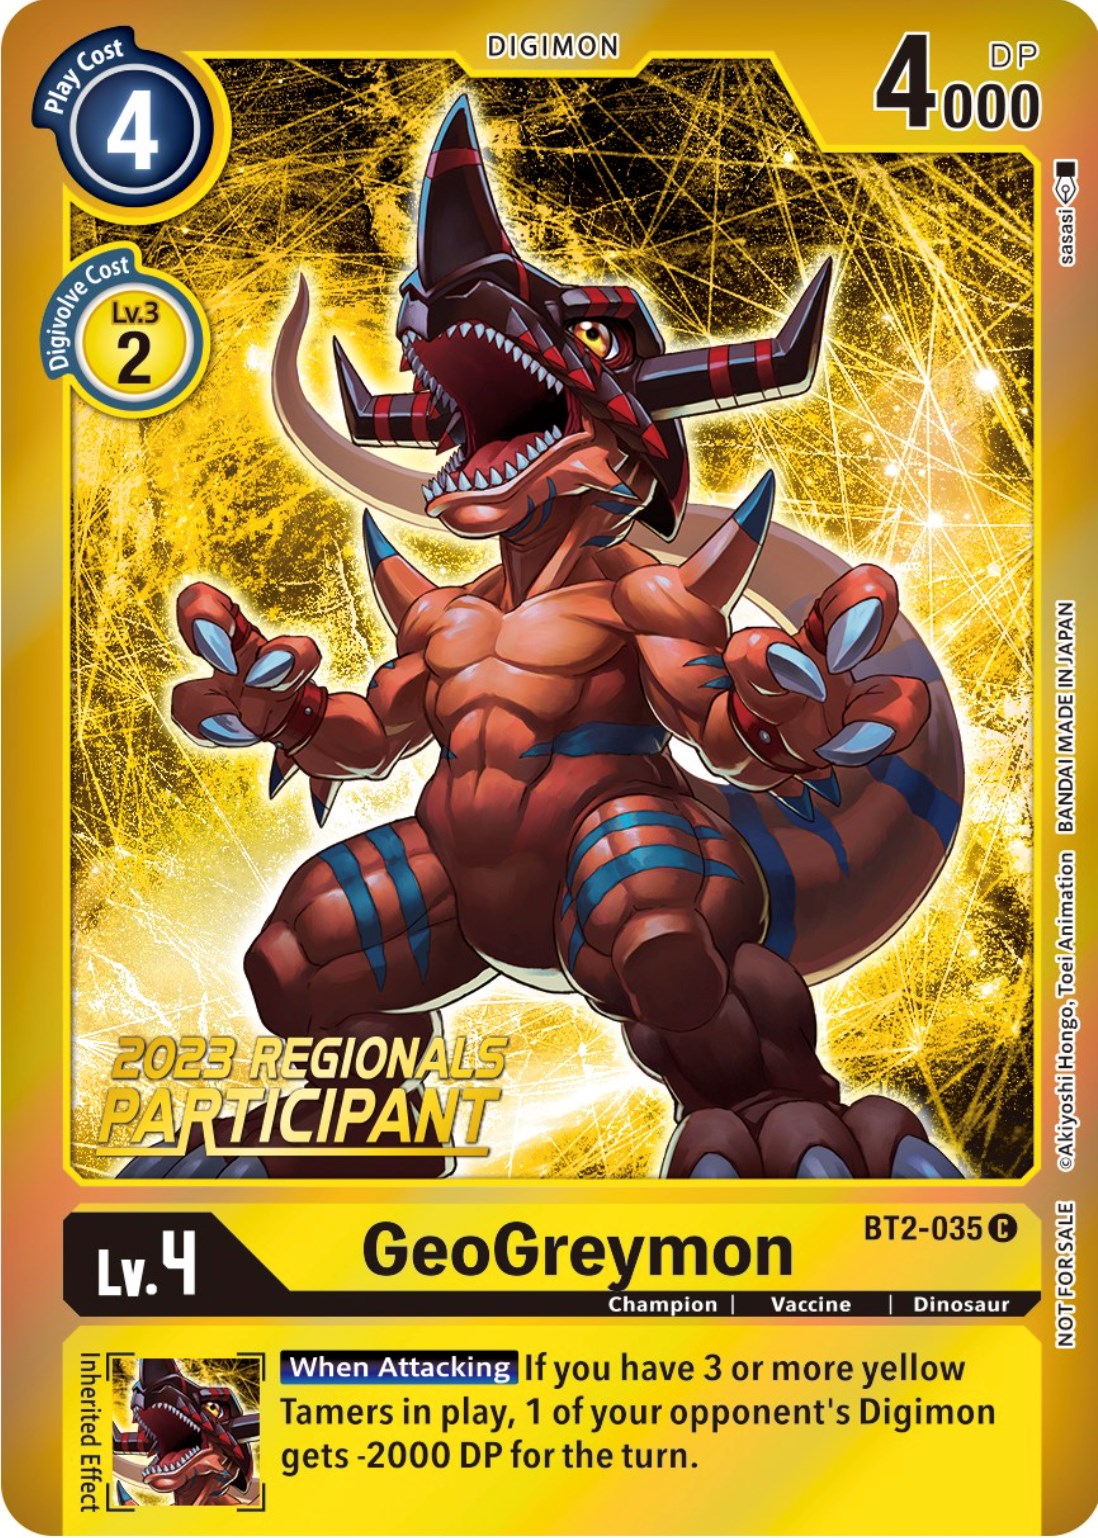 GeoGreymon (2023 Regionals Participant) Release Special Booster